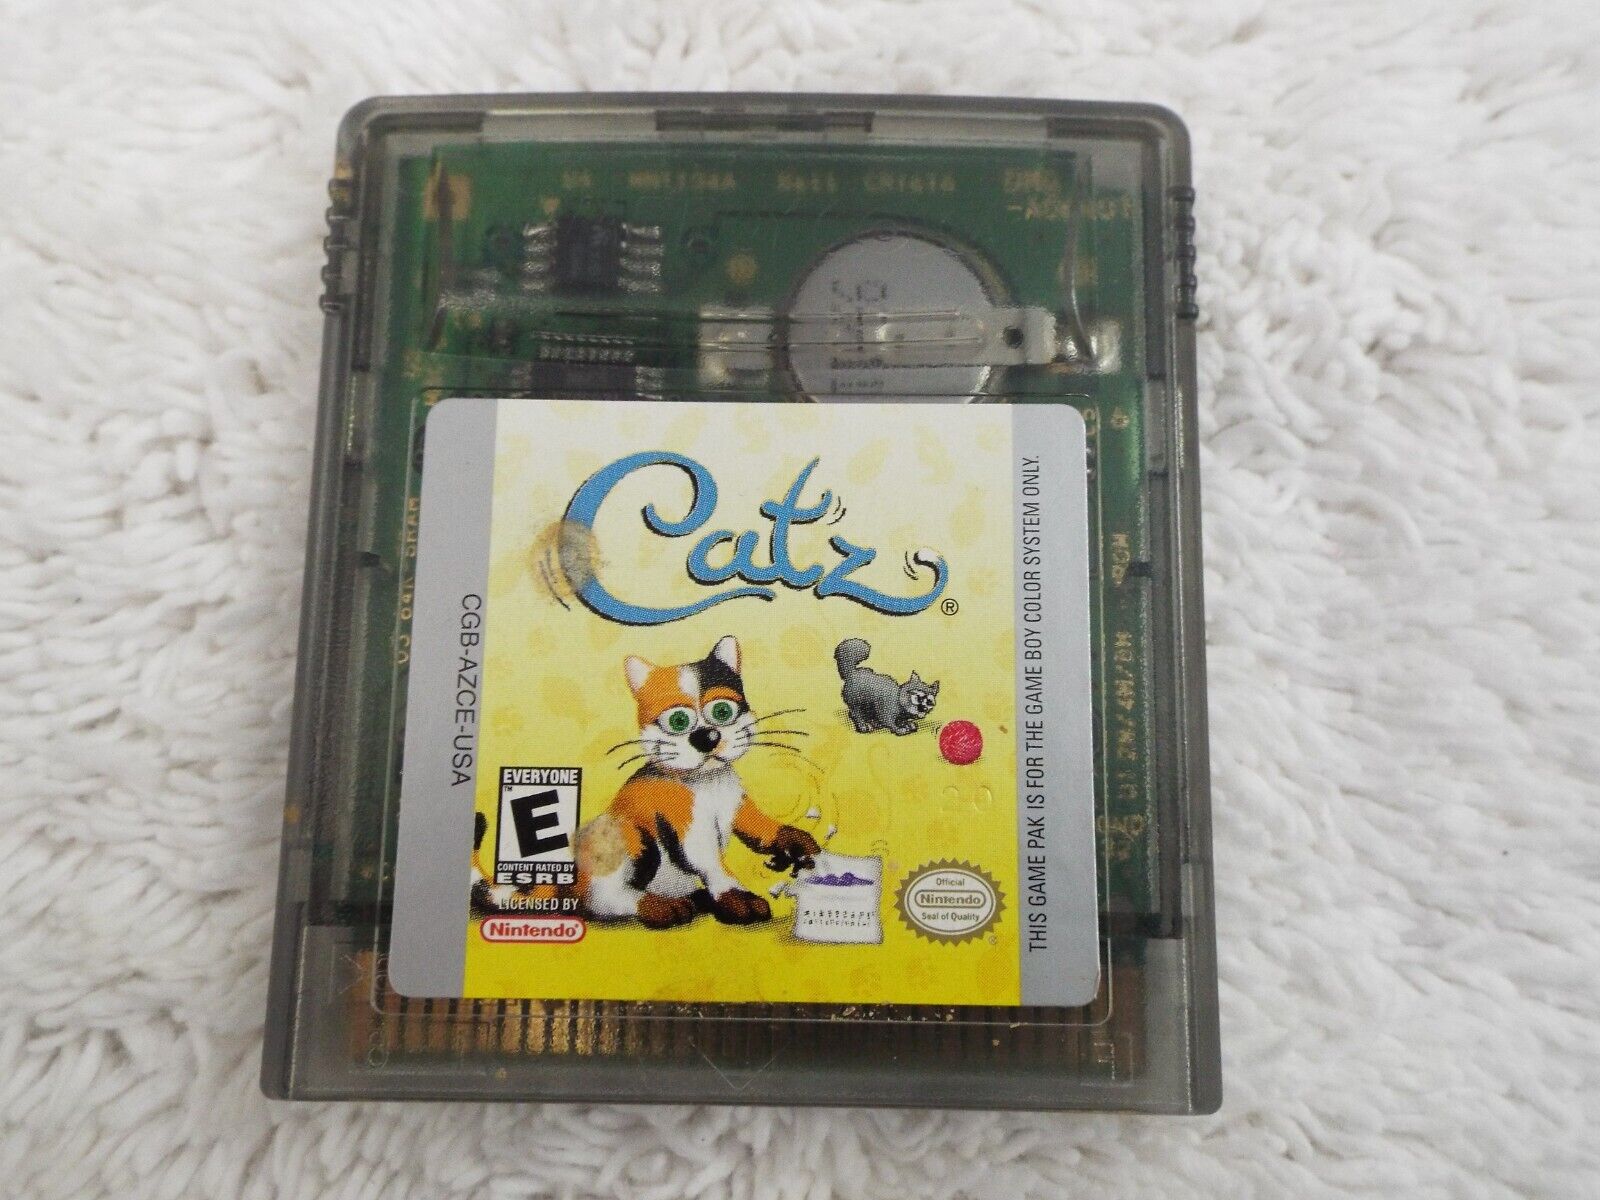 Game Boy Color - CATZ - Cartridge Only - Authentic & Works